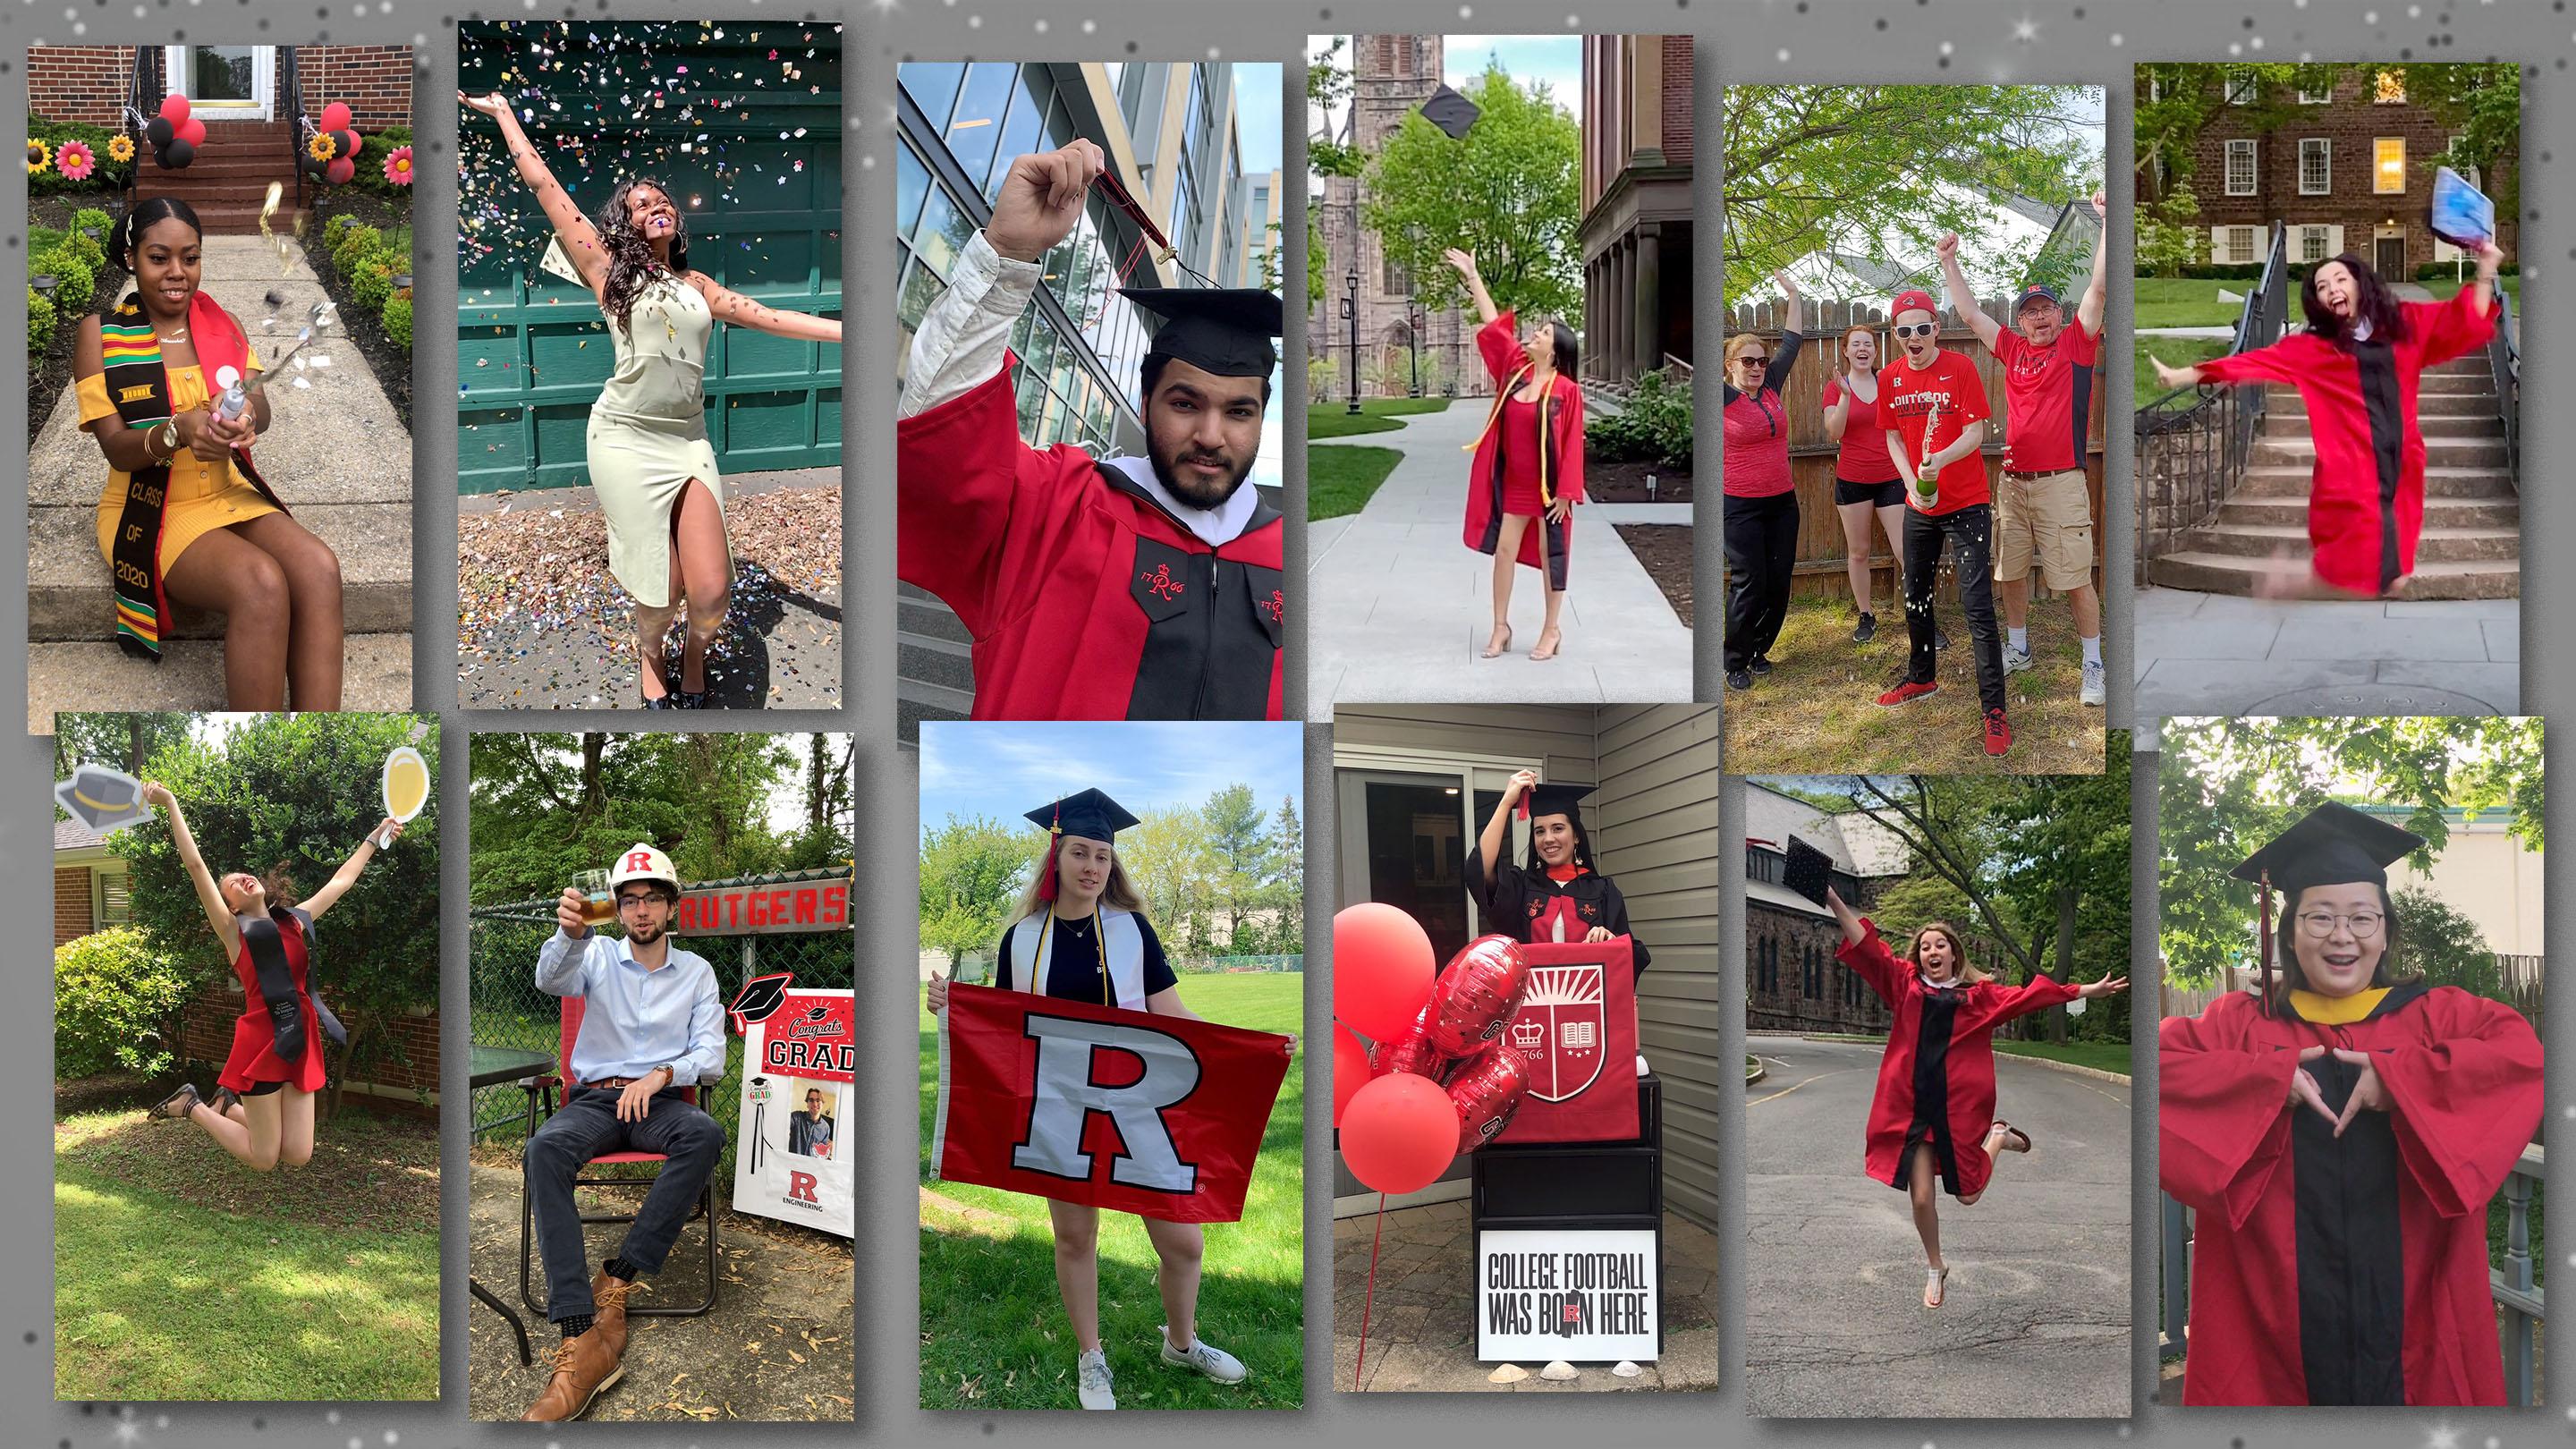 Rutgers Virtual Commencement Celebrates the Class of 2020 Graduating